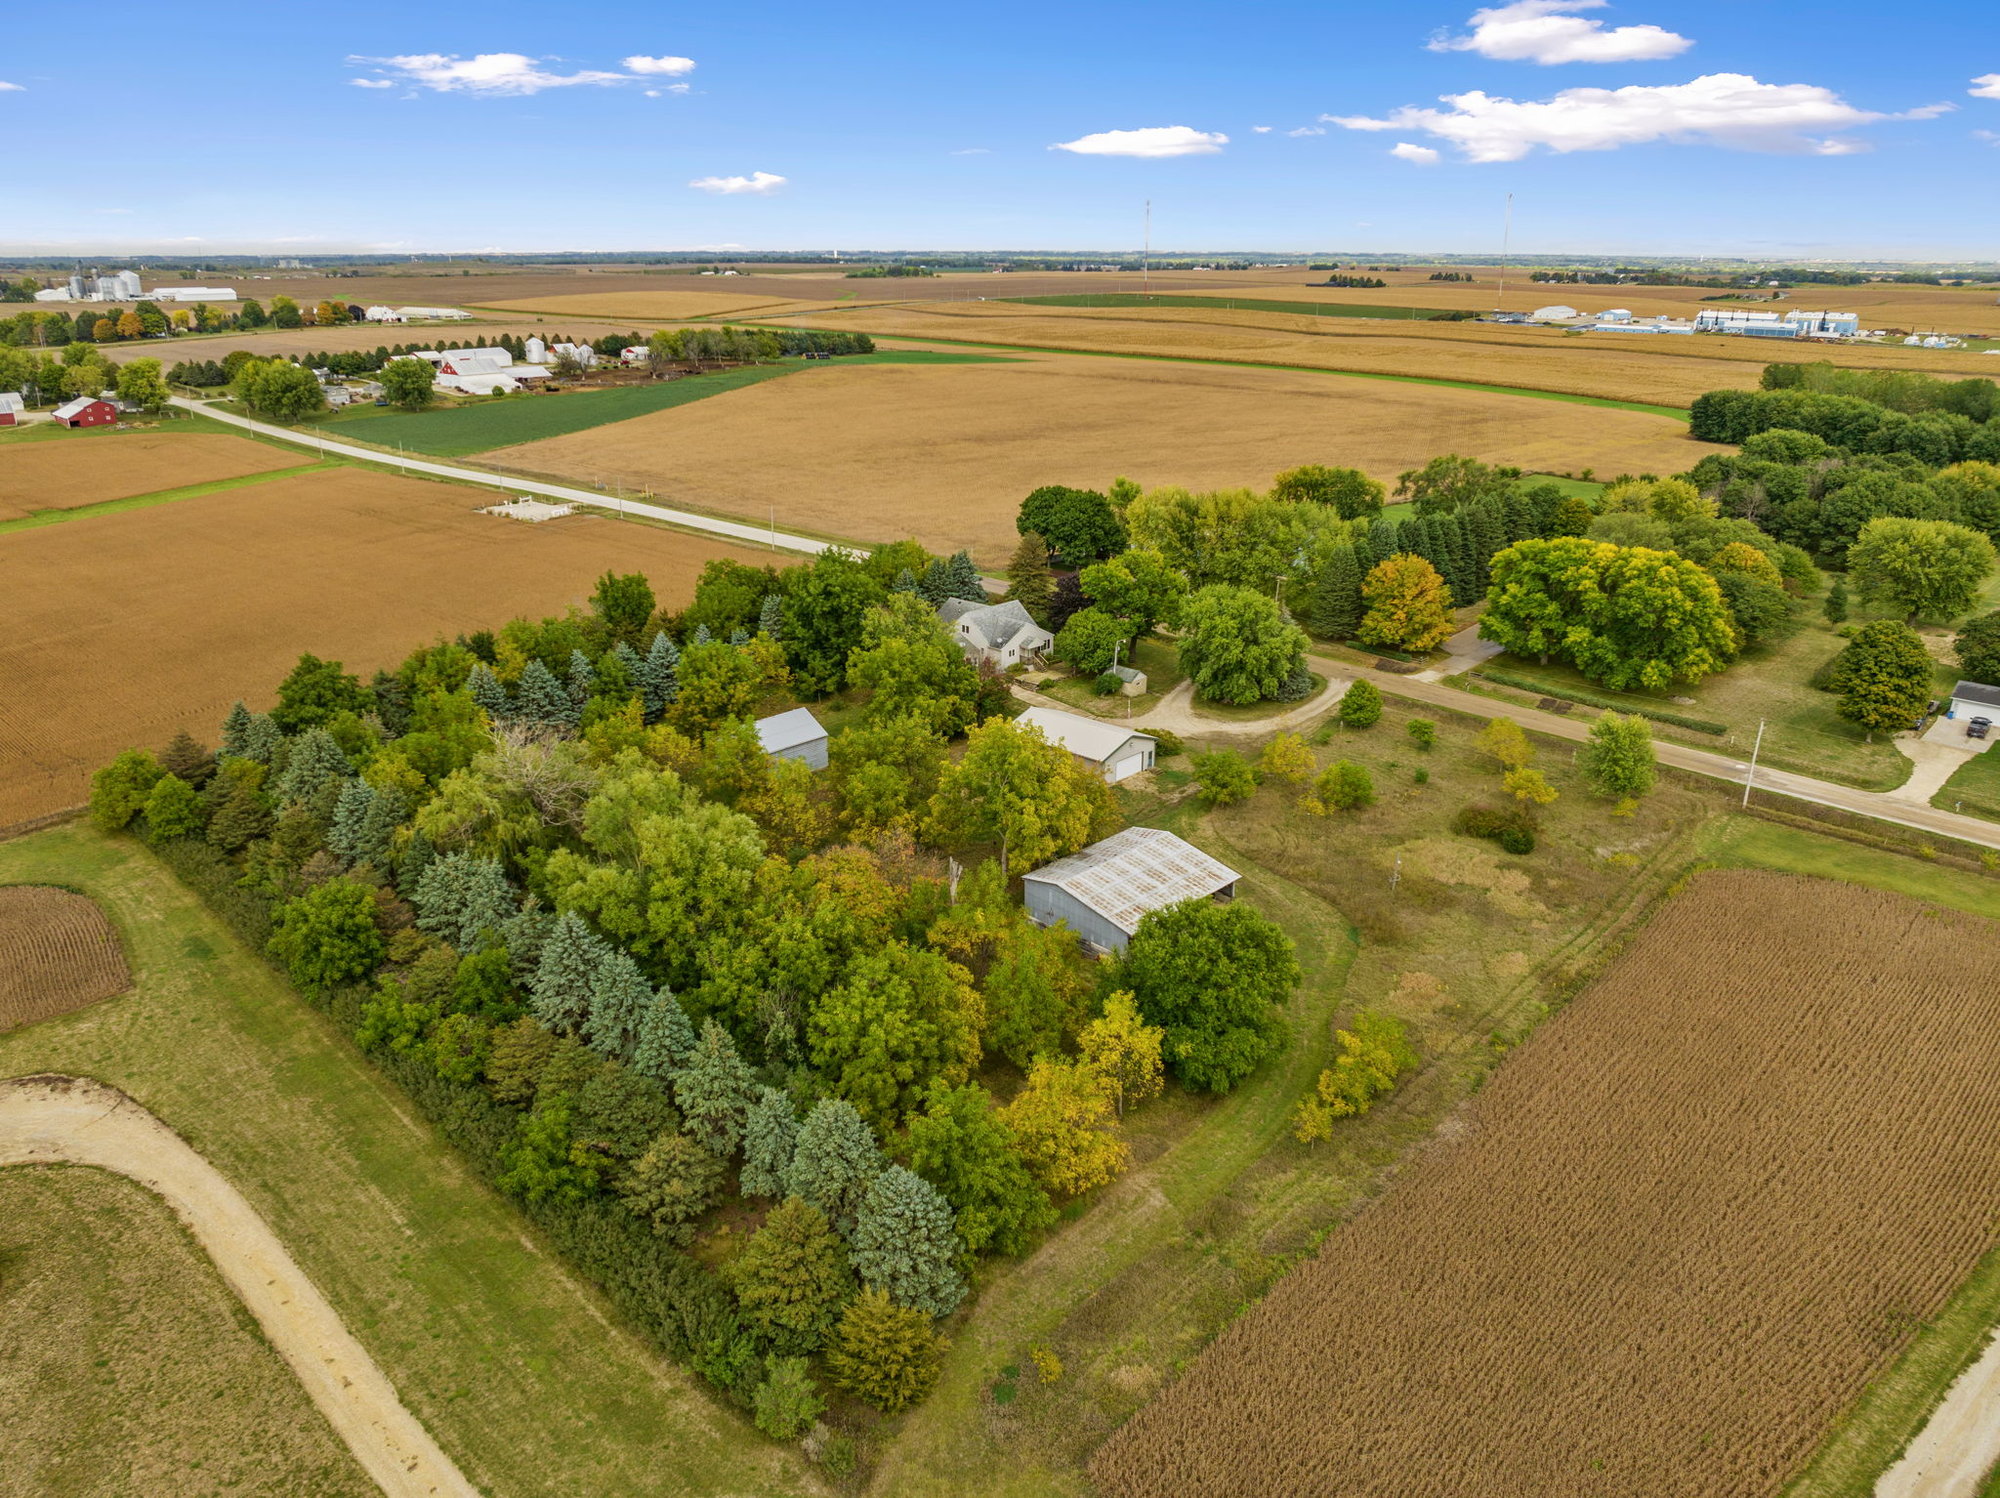 Check out this Spacious Acreage for Sale Just South of Waterloo | Oakridge Real Estate